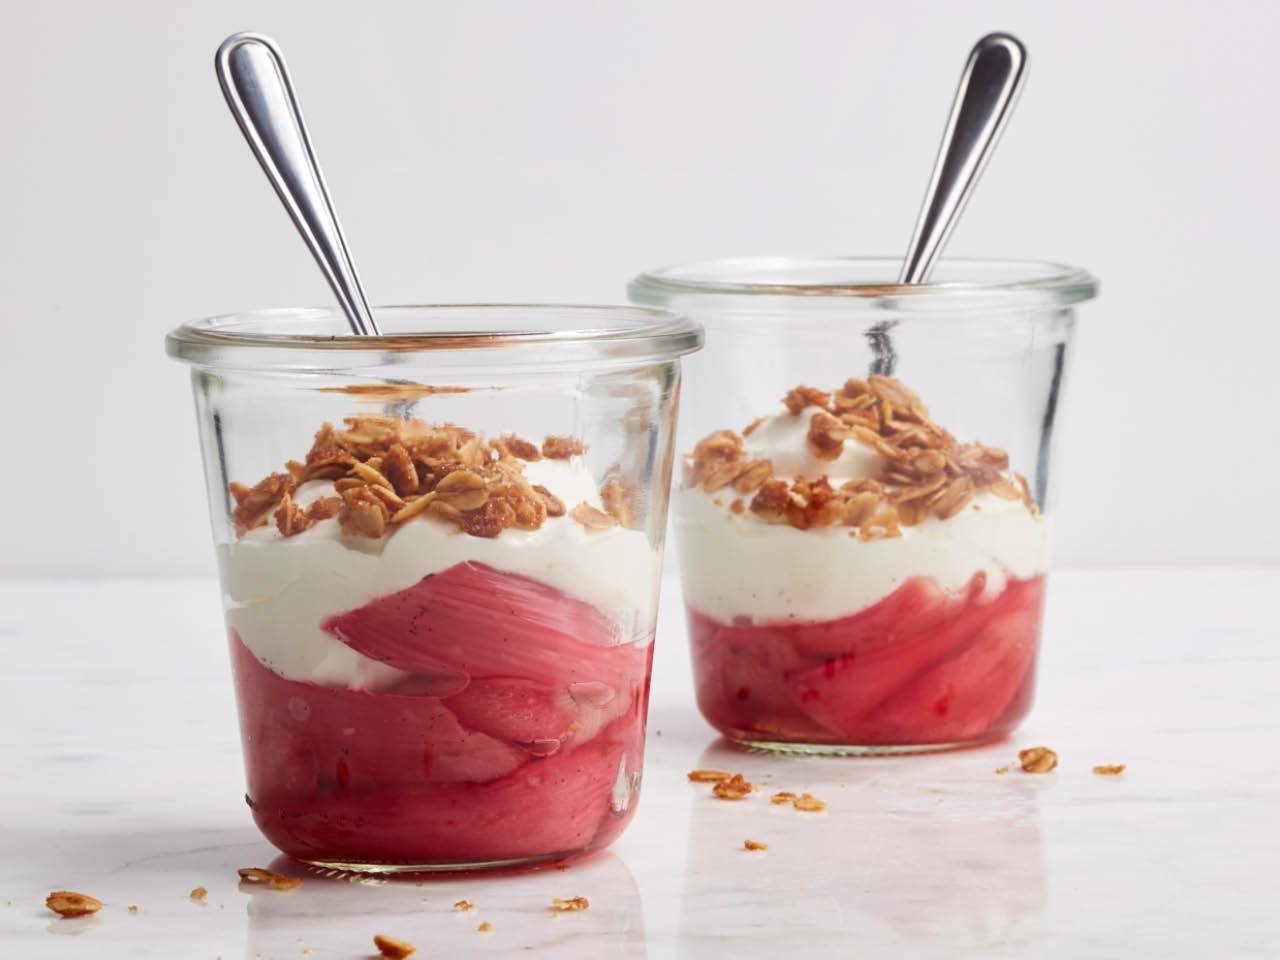 Rhubarb cranachan in a glass with a spoon stuck into and another glass of the same desert behind it on a white counter with crumbs